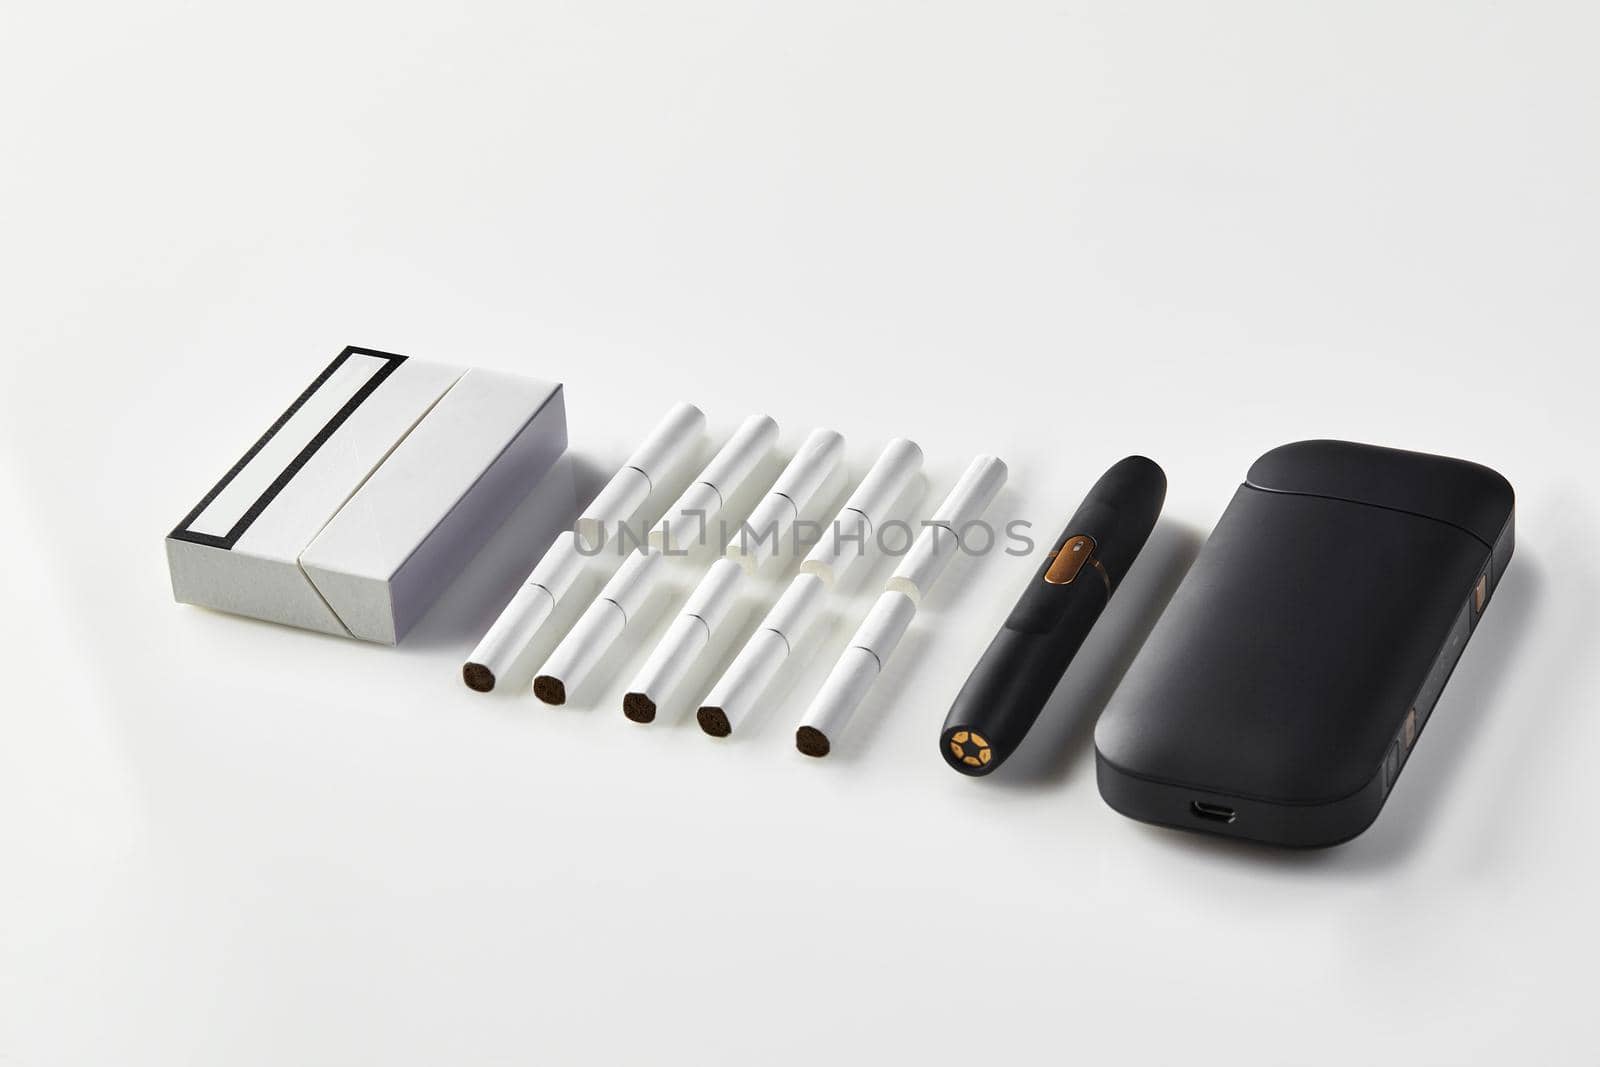 New generation black electronic cigarette and battery, one pack and ten heatsticks isolated on white. New technology. Heating tobacco system. Template place for your text, image. Close up